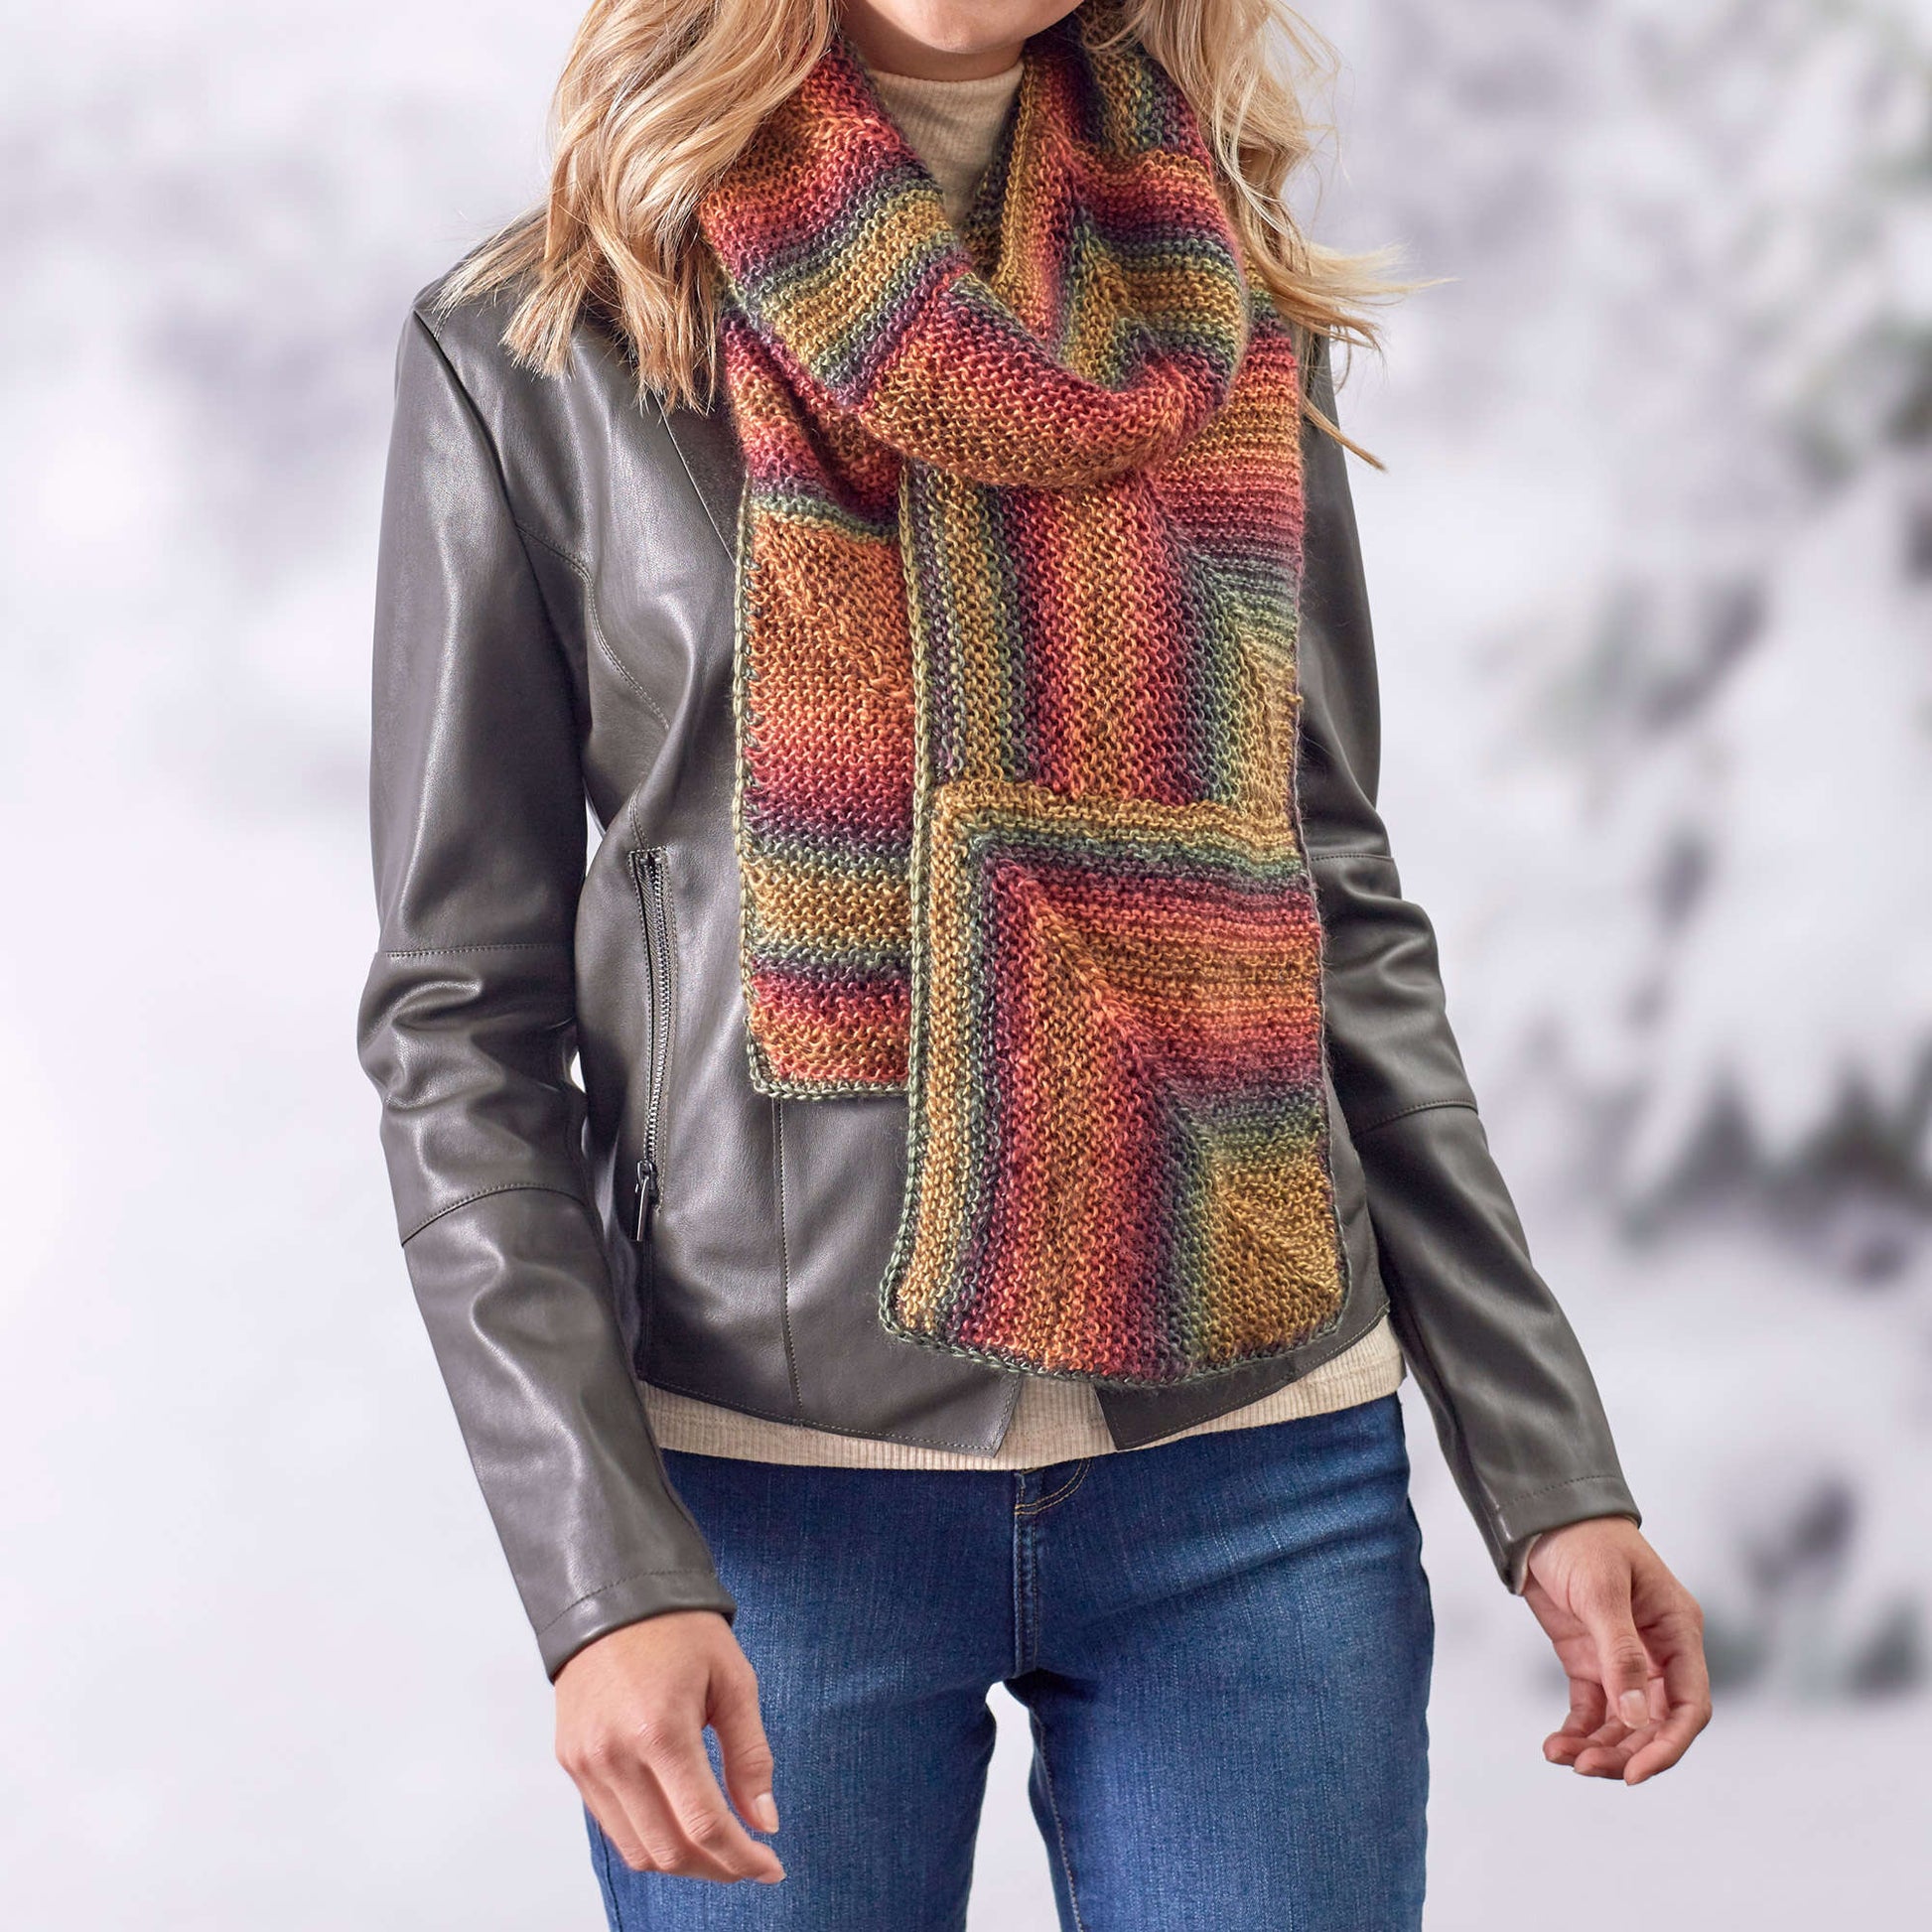 Free Red Heart Amazing Mitered Scarf Knit Pattern